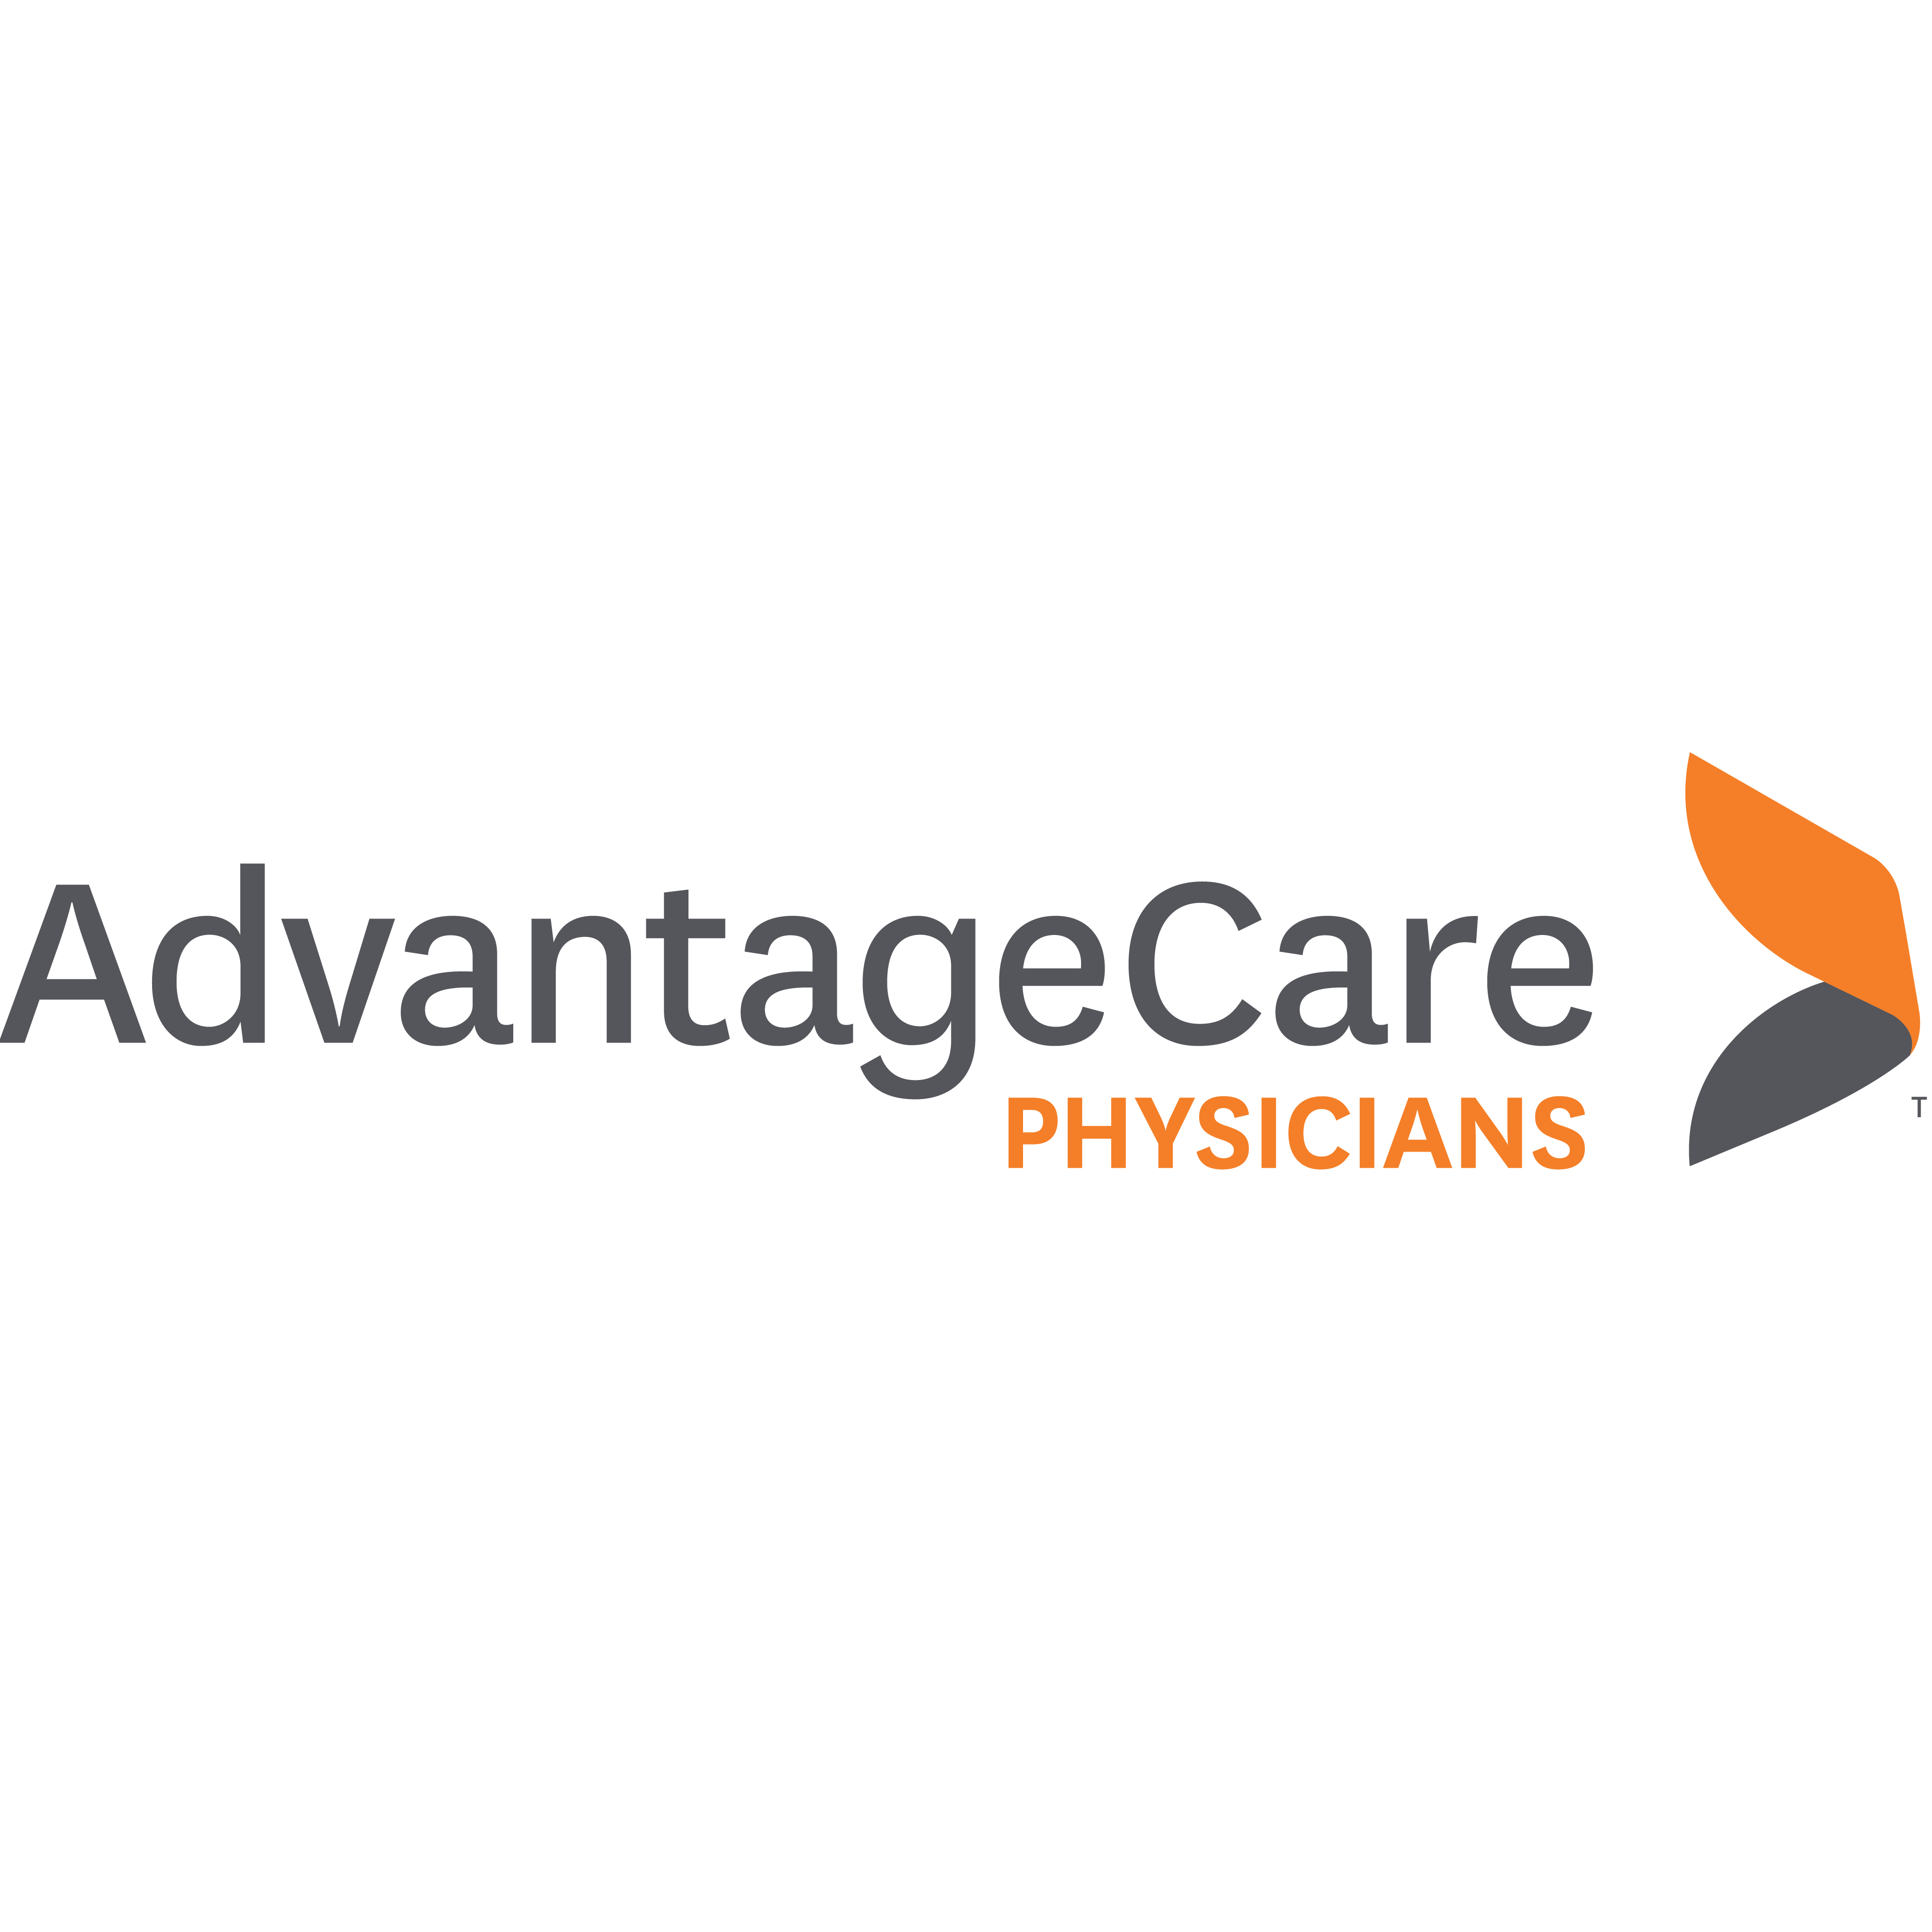 AdvantageCare Physicians - Crown Heights Medical Office Logo